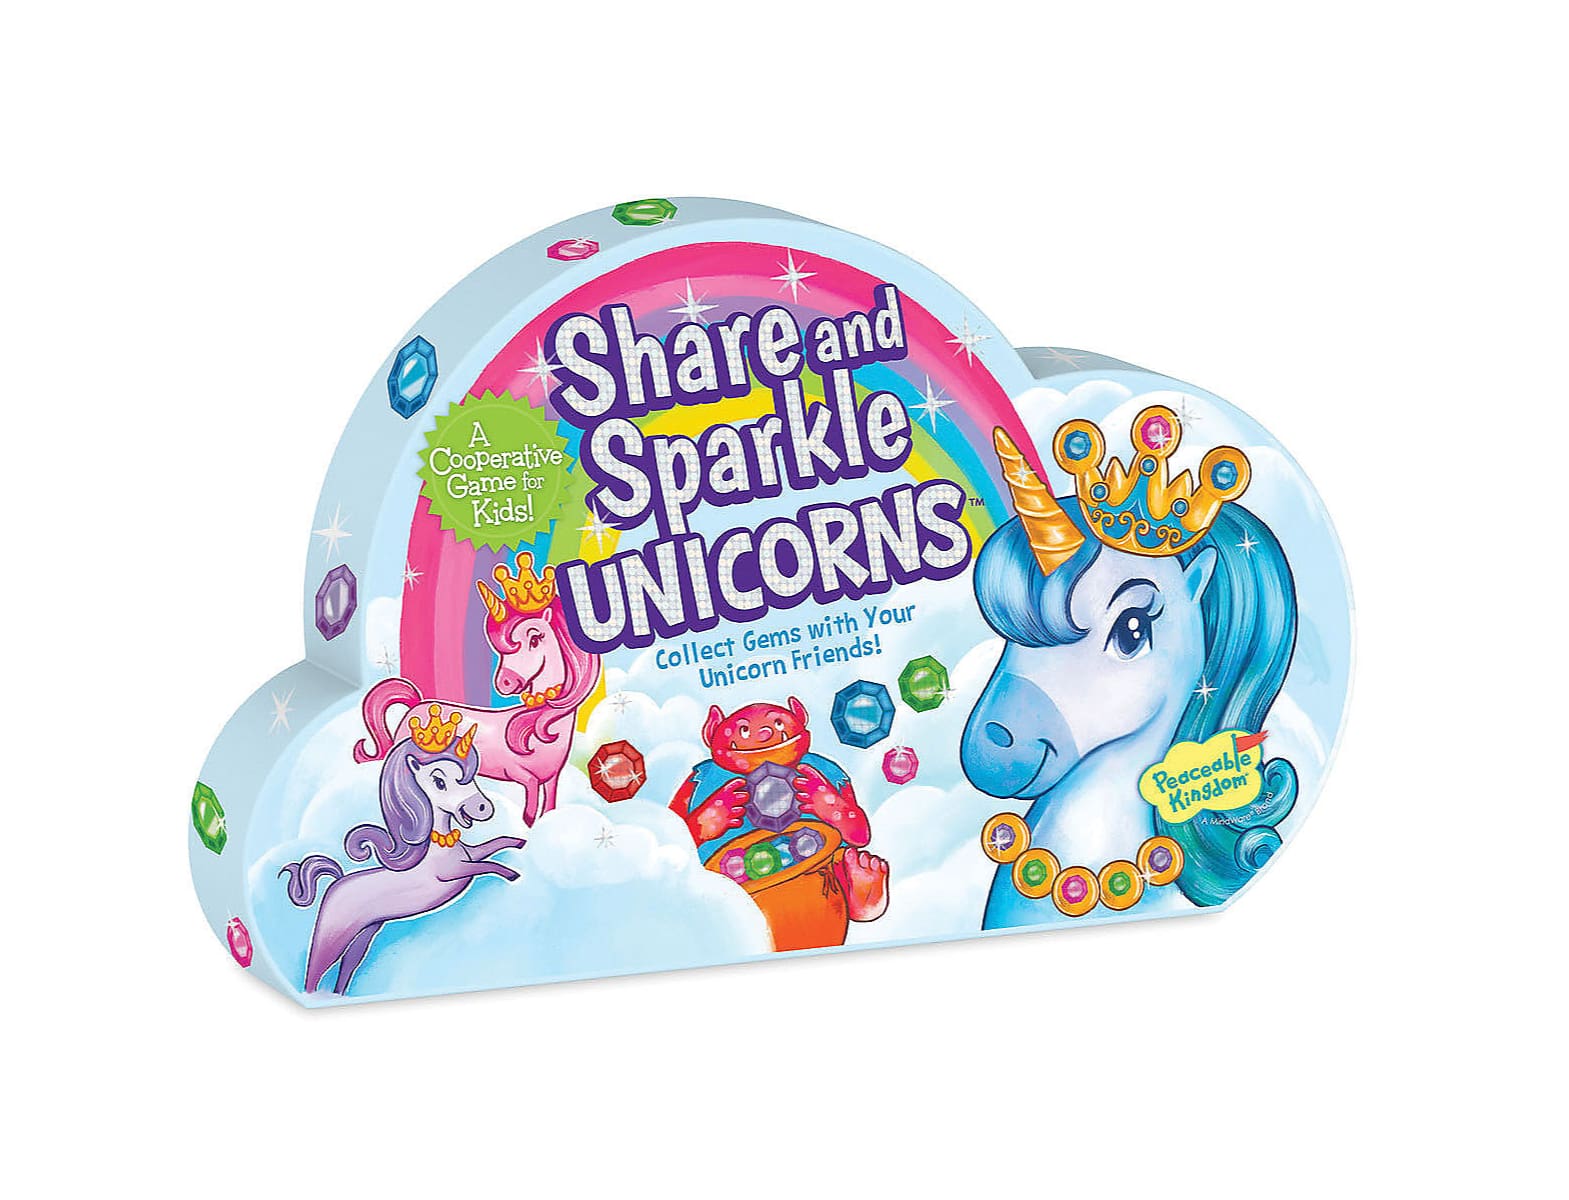 Share and Sparkle Unicorns Box with large unicorn with gems on her necklace and crown and a troll